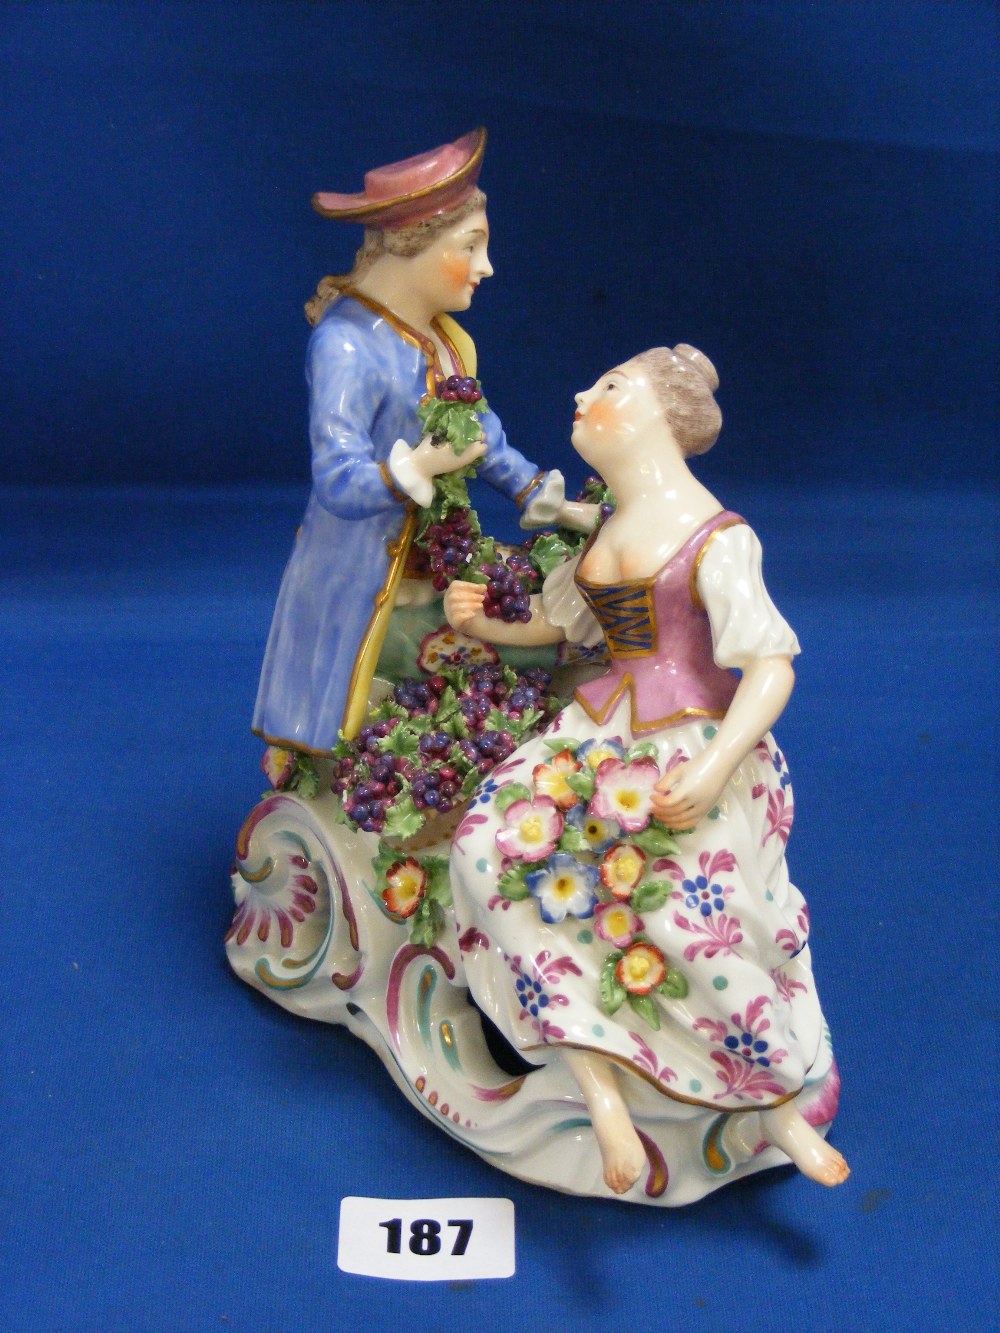 An antique Continental porcelain figural group, in the manner of Meissen, depicting a gentleman